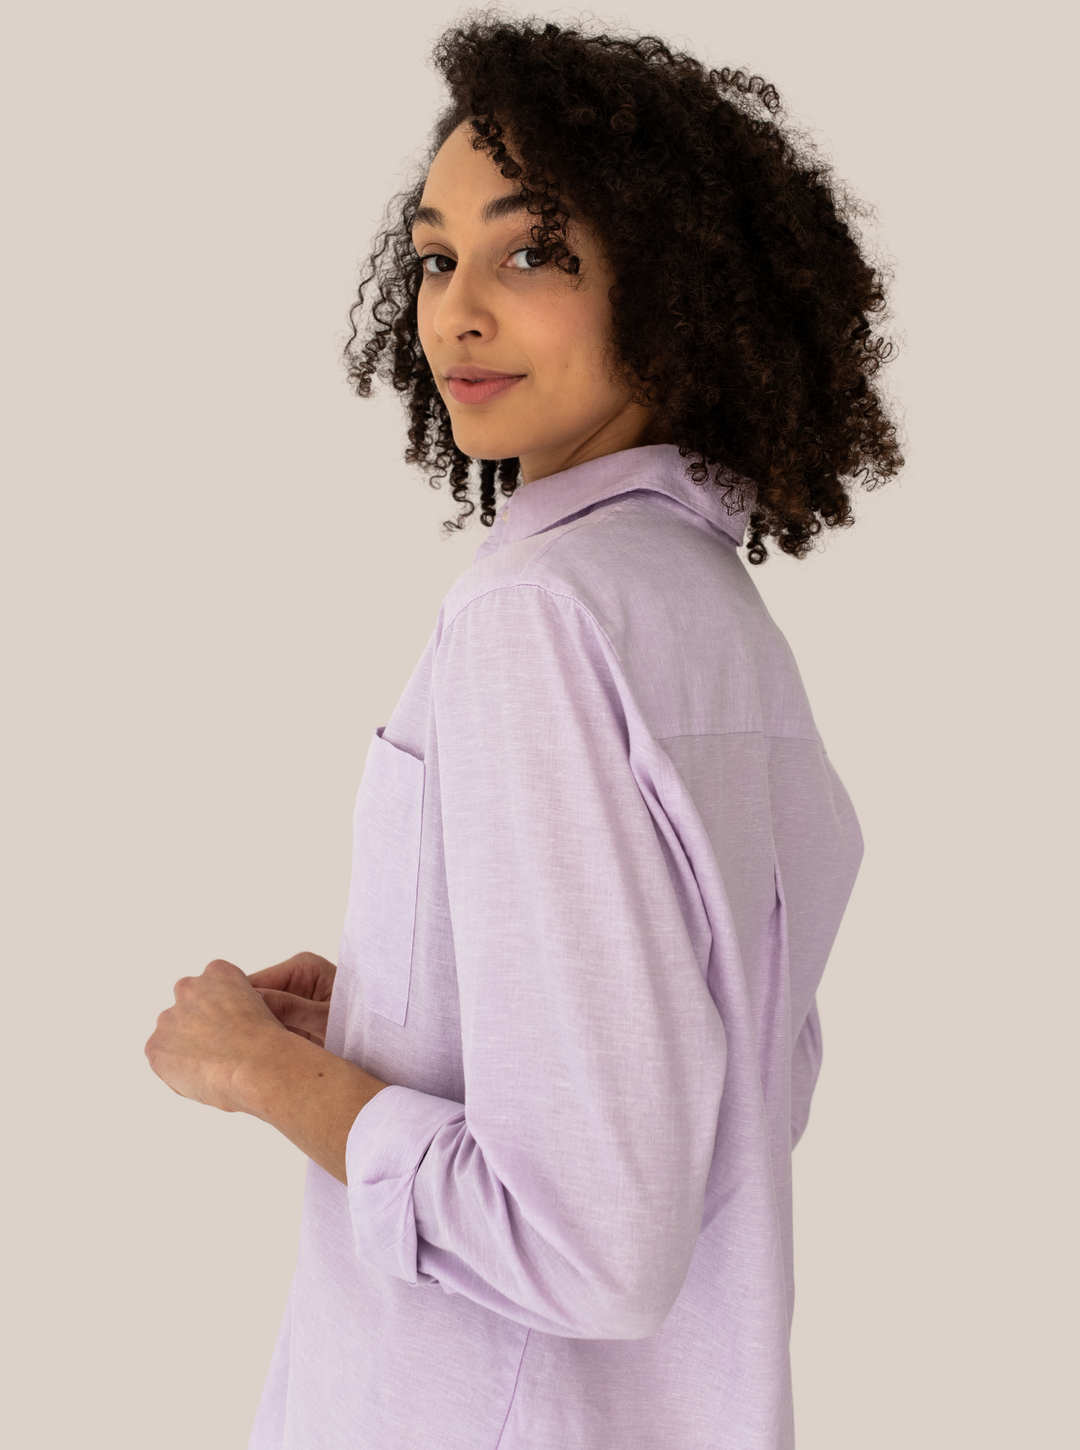 Model with Lilac blouse from the side